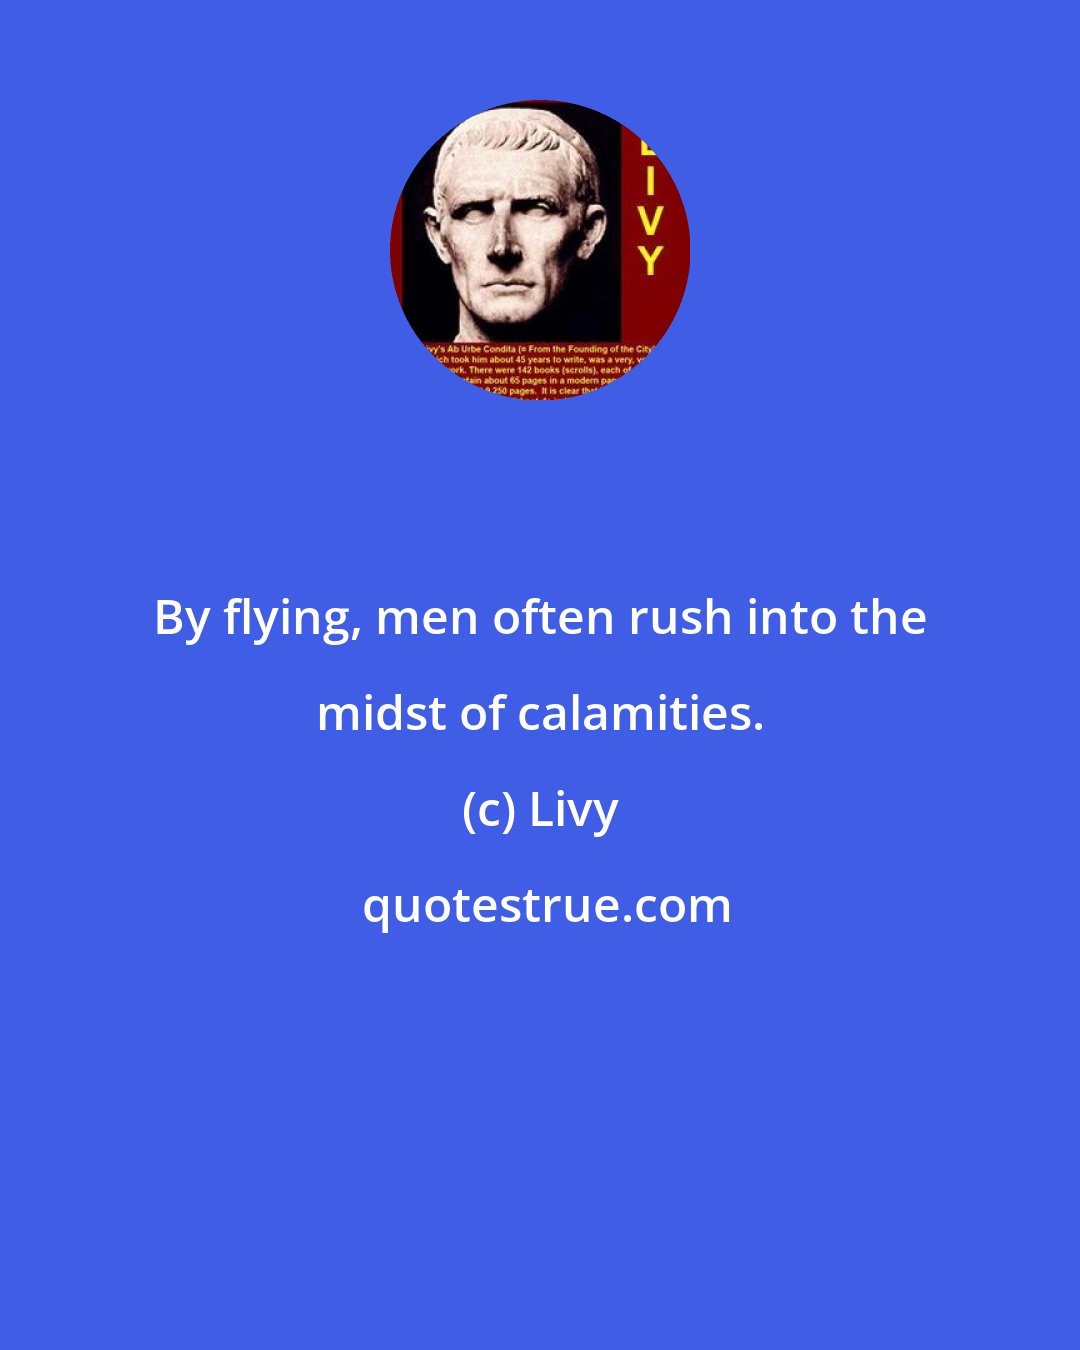 Livy: By flying, men often rush into the midst of calamities.